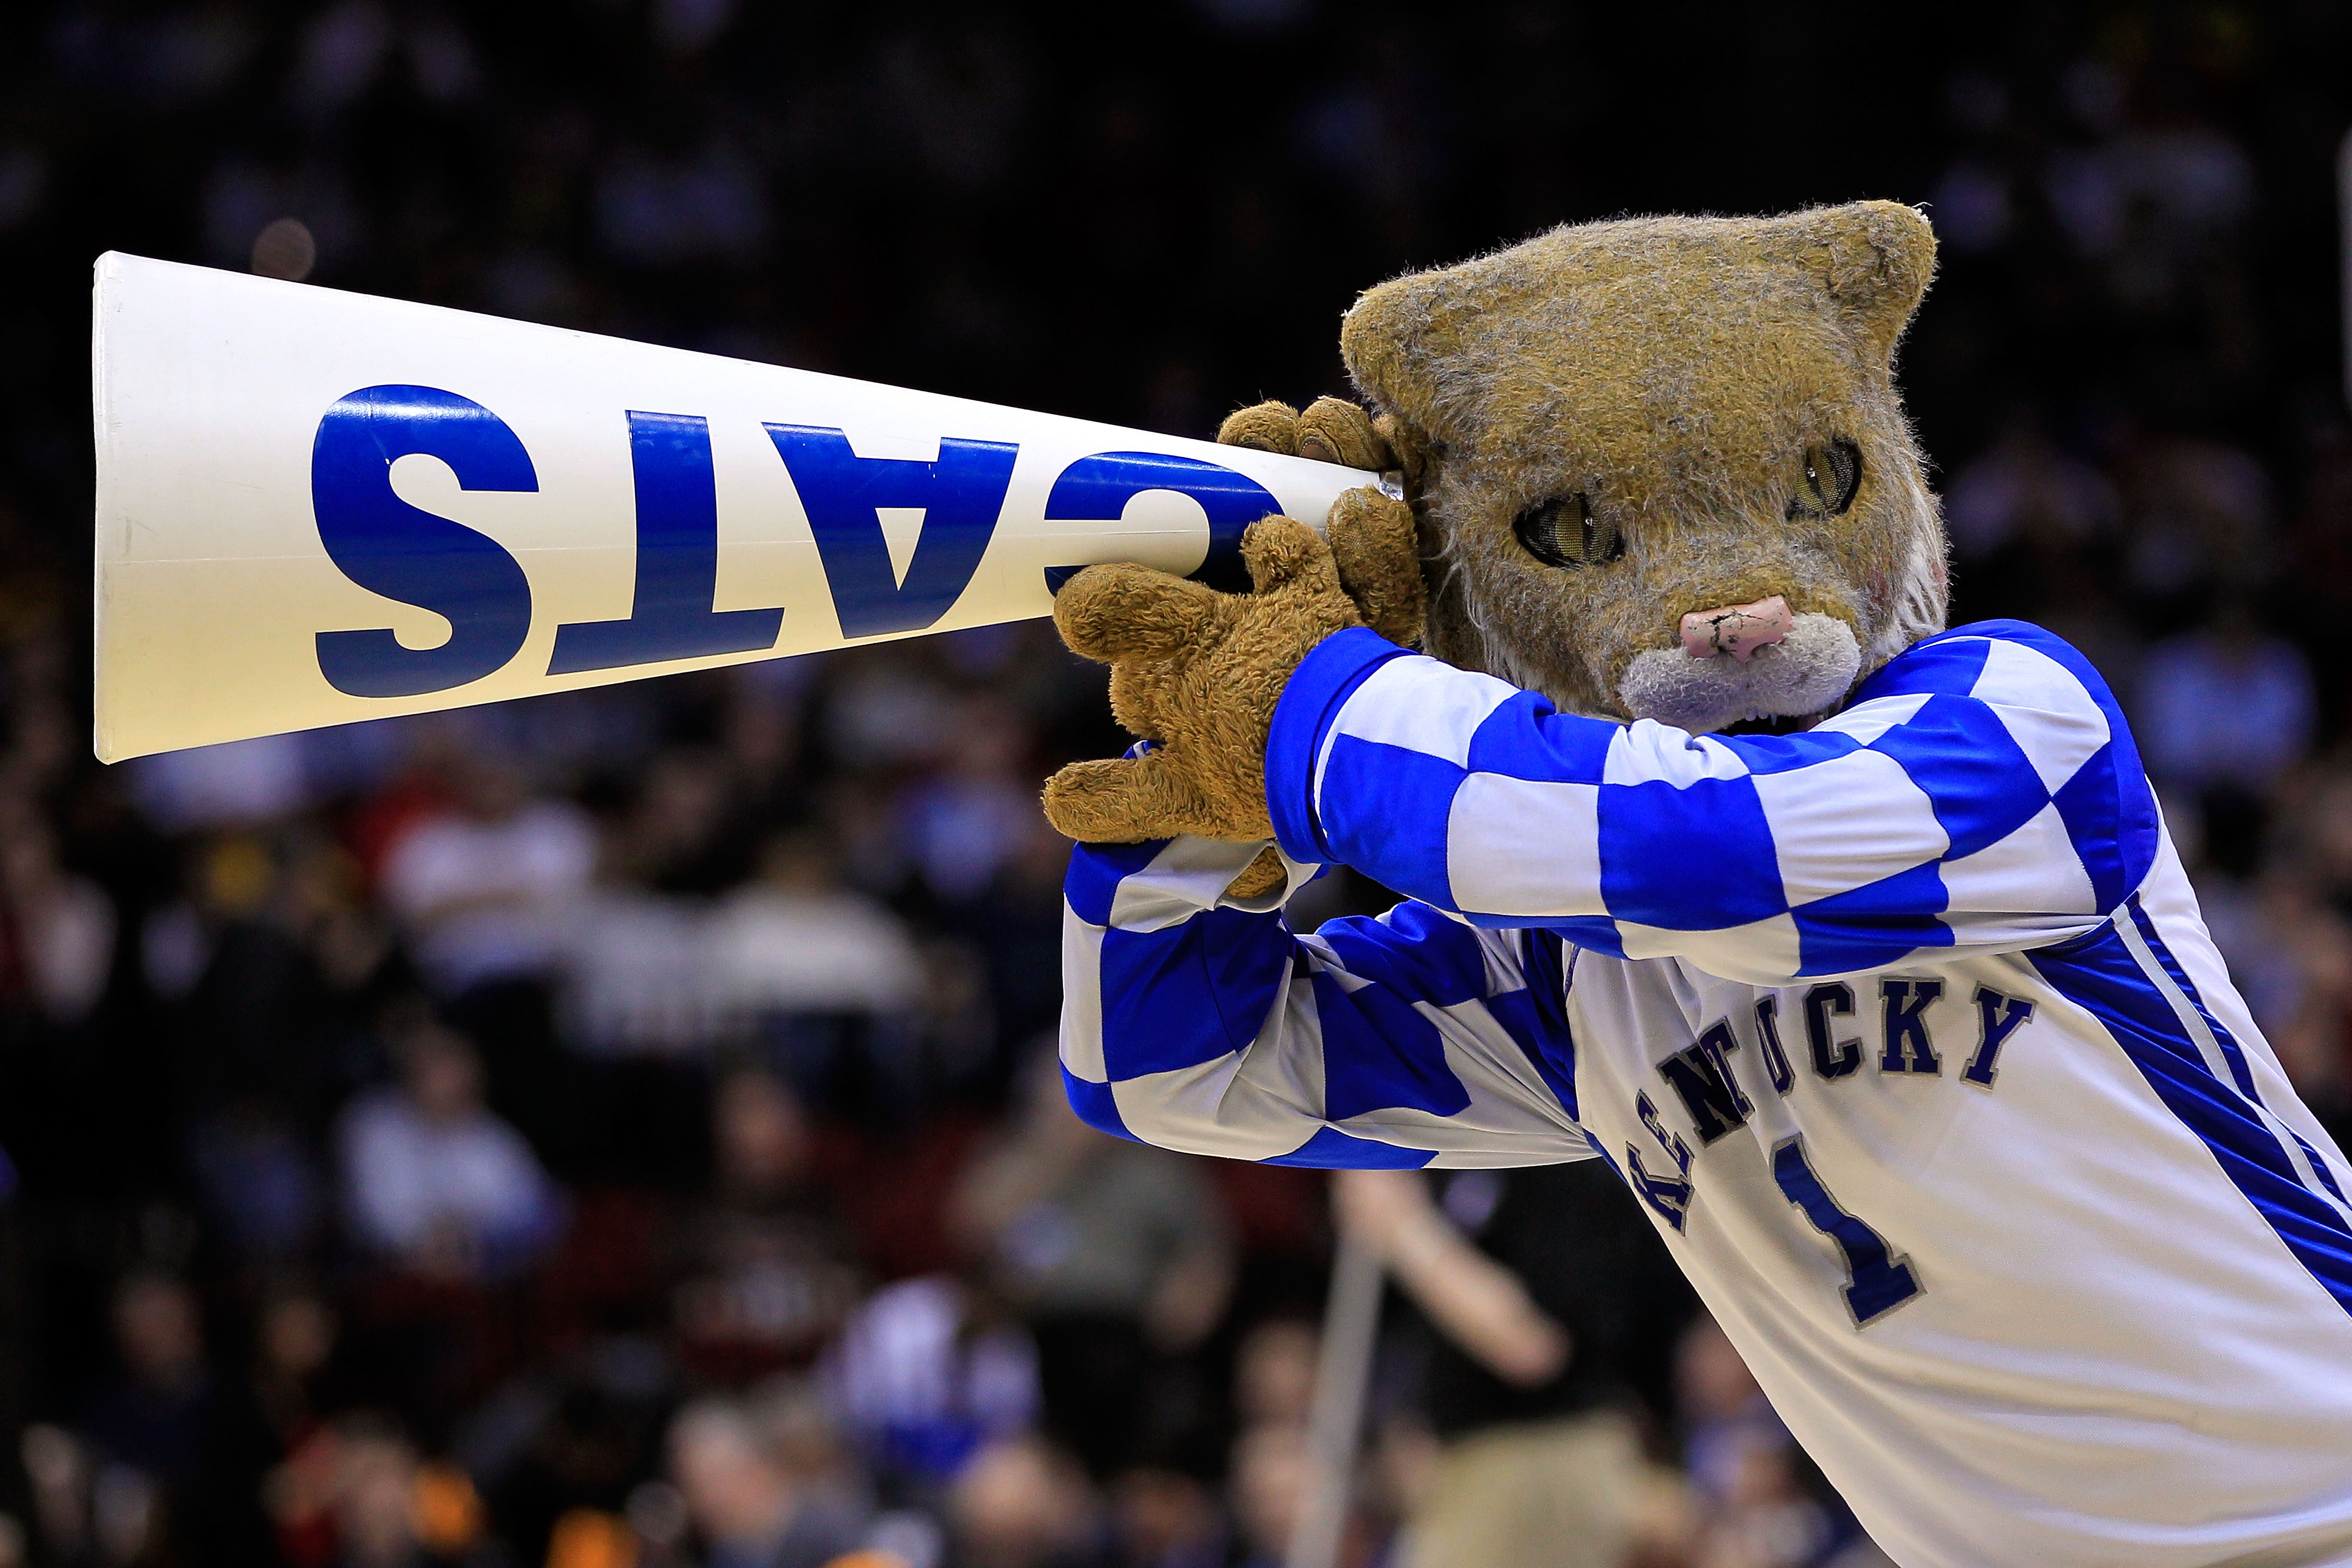 NEWARK, NJ - MARCH 25:  The Wildcat, mascot for the Kentucky Wildcats, performs during the east regional semifinal of the 2011 NCAA Men's Basketball Tournament at the Prudential Center on March 25, 2011 in Newark, New Jersey.  (Photo by Chris Trotman/Gett